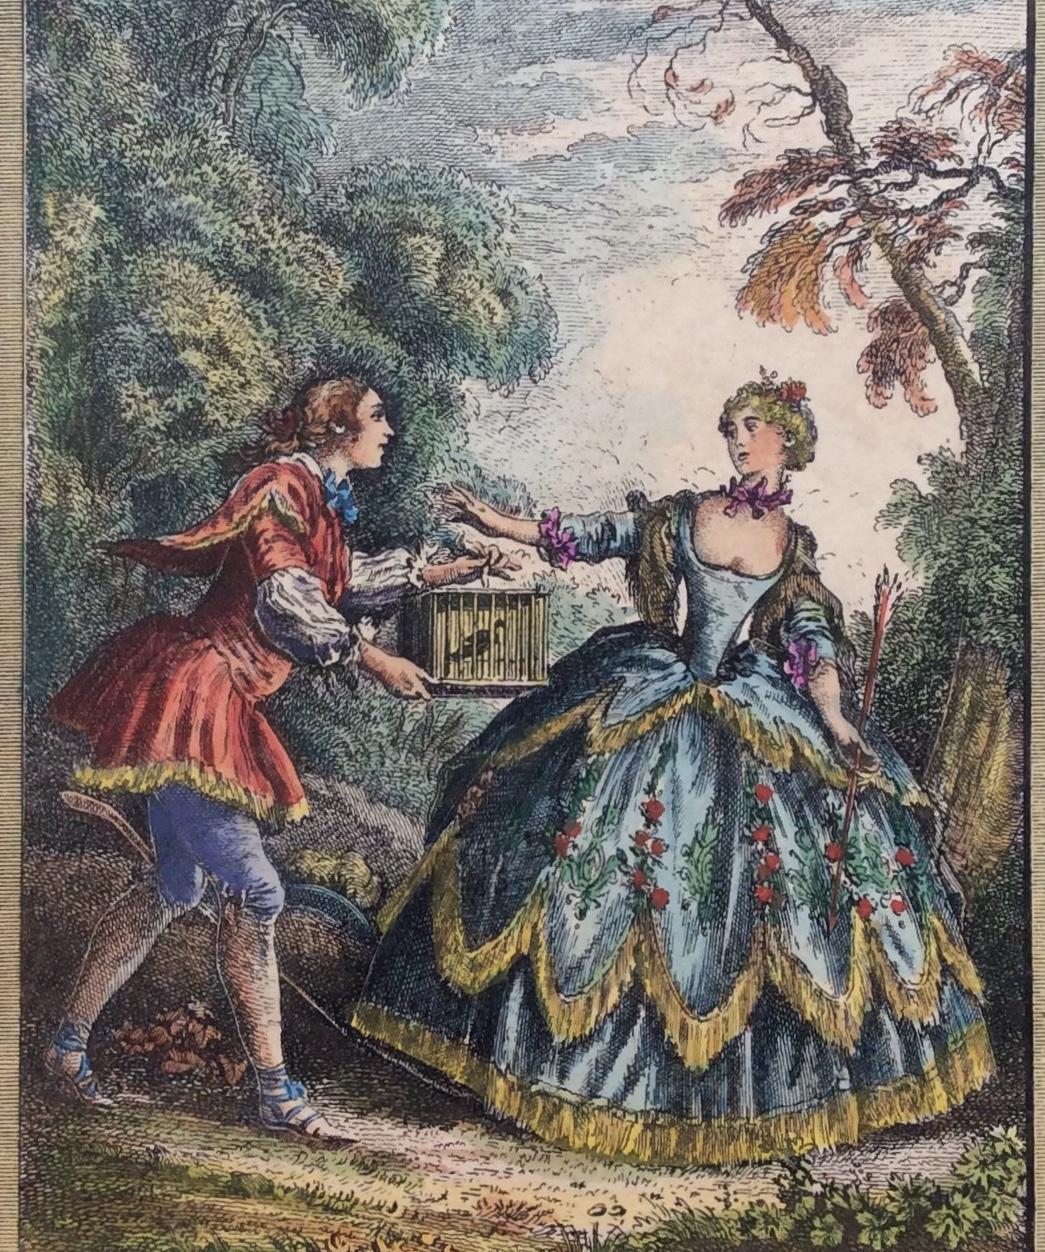 Antique engraving prints - make a great gift!

Fine crisp impression of great rarity; it is particularly unusual to find a 18th century color engraving print of this quality and condition in today’s print market.

Rare engraving print by famed